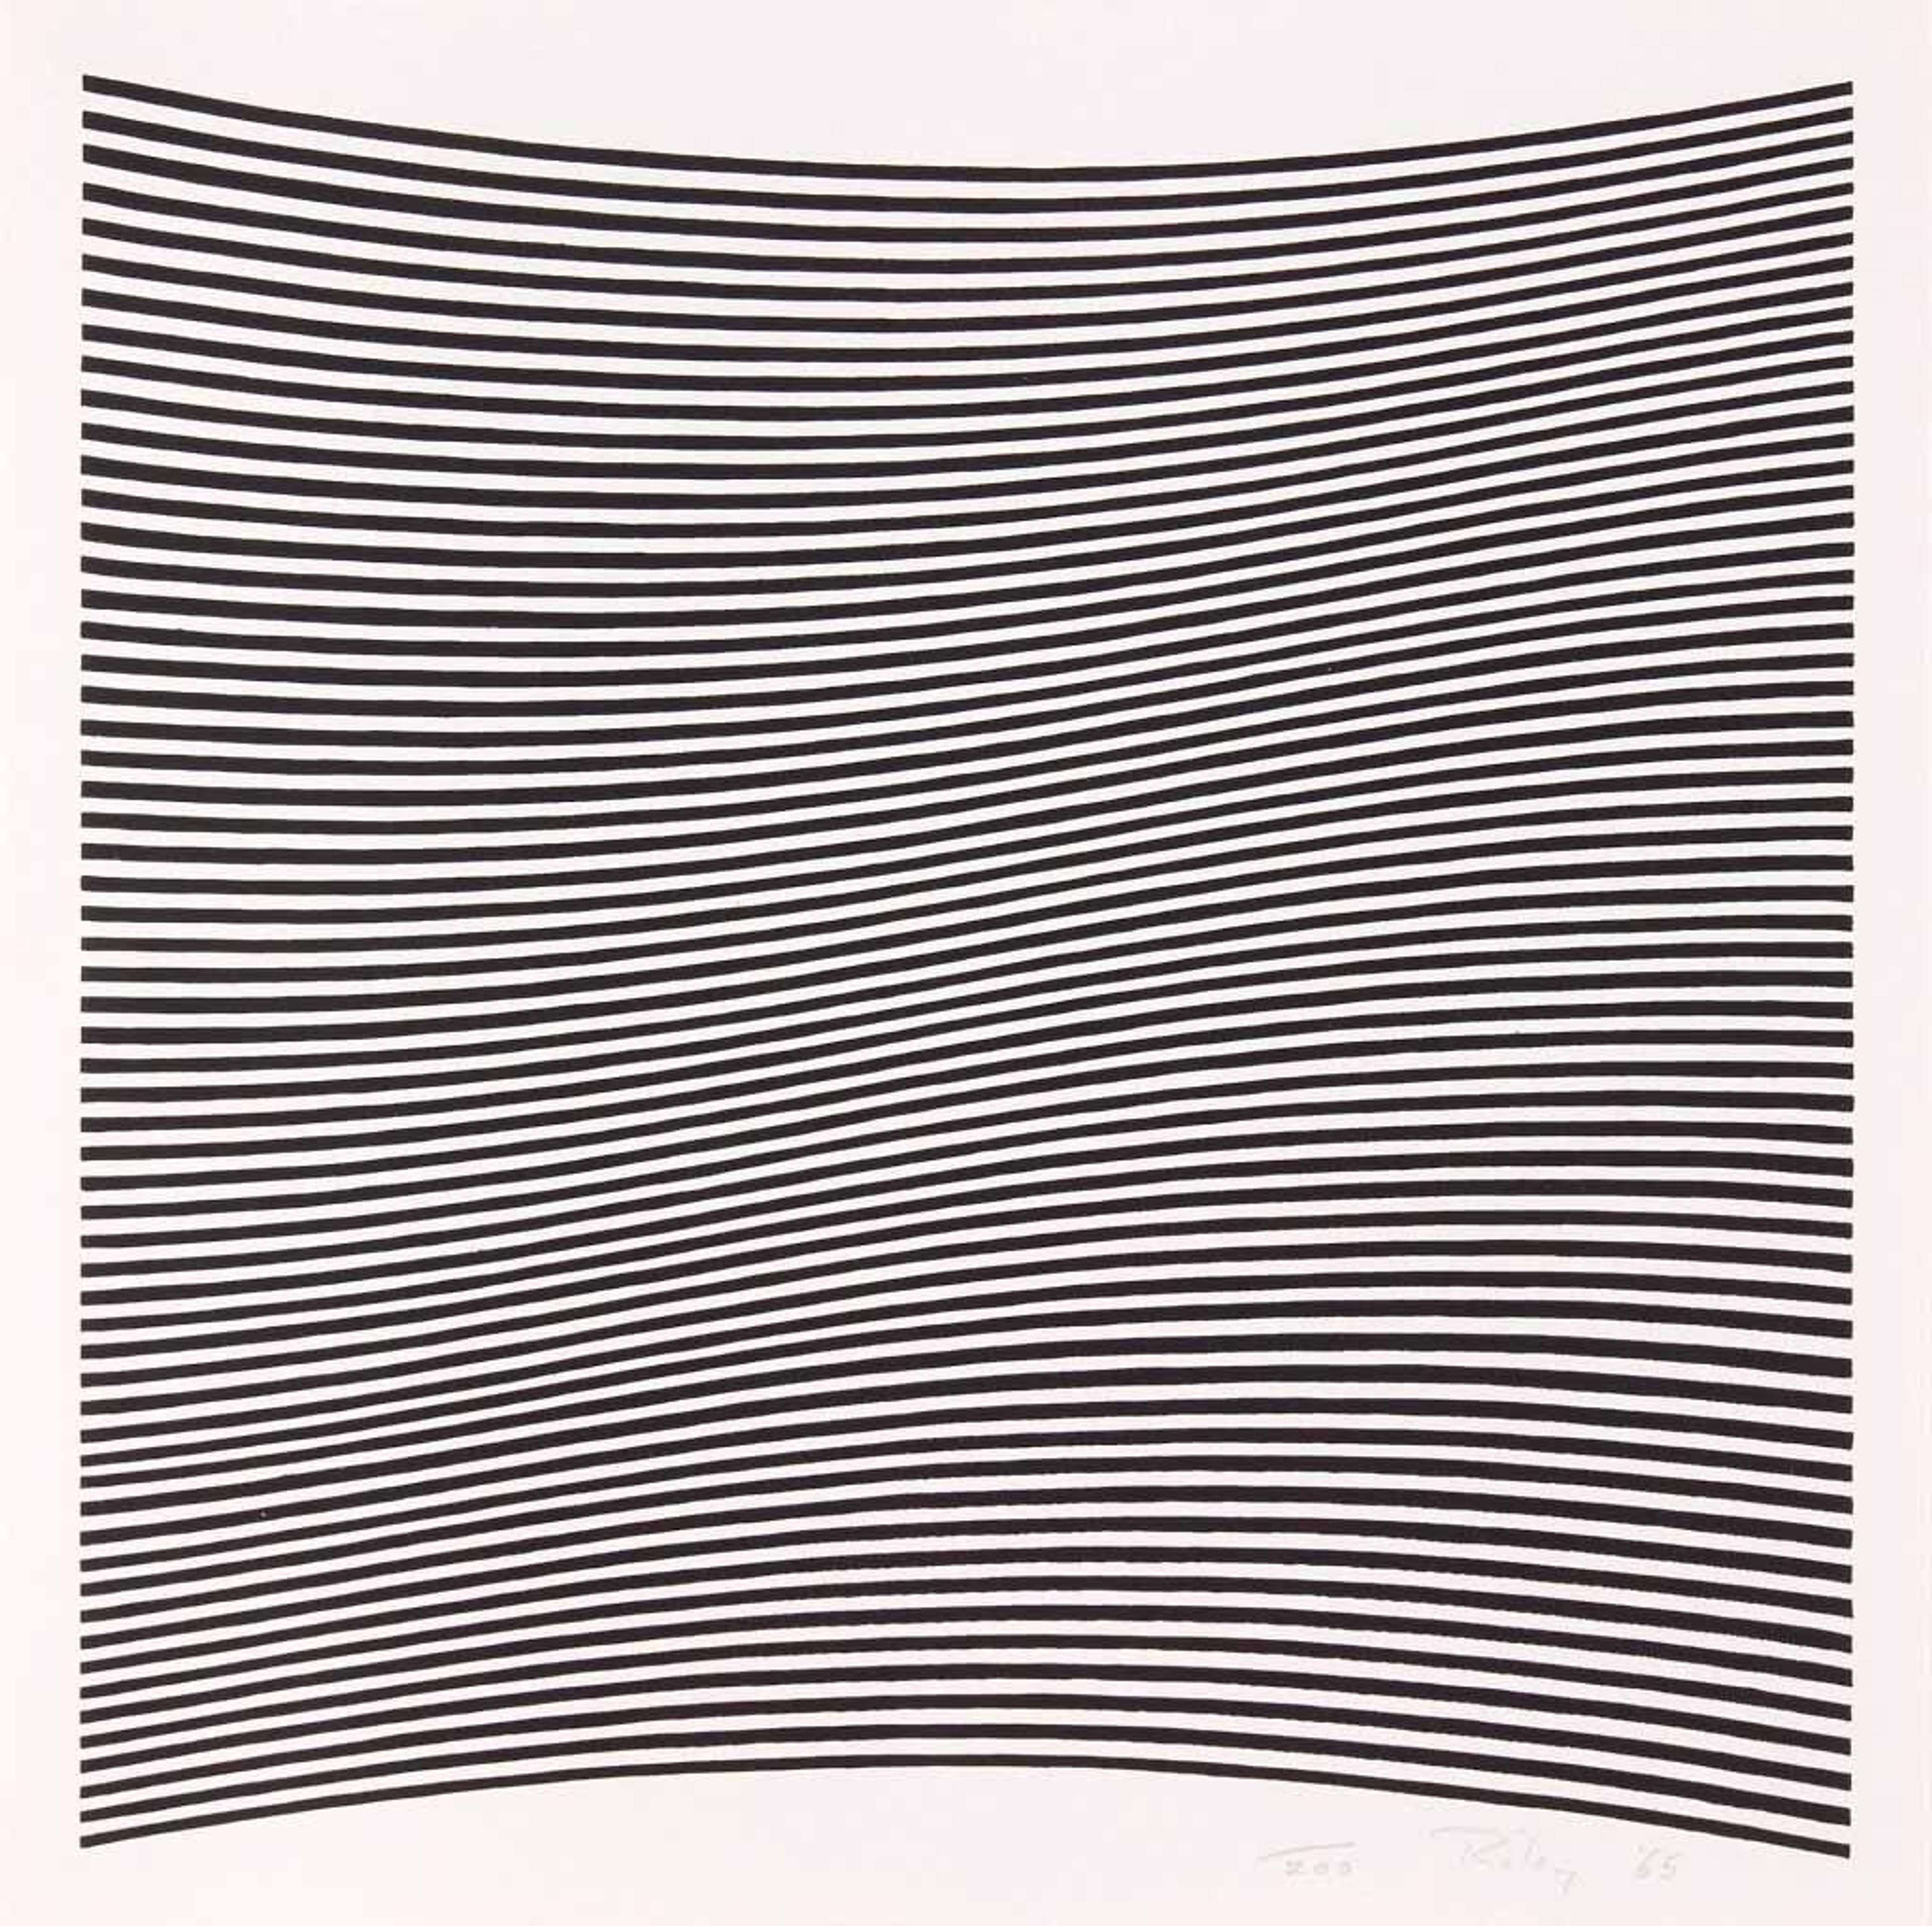 This print is composed simply of black horizontal lines of equal length, yet, in true Riley fashion, the effects of such simplicity are complex. The lines, as they move from top to bottom, slowly merge from being concave to convex. Consequently, the black lines appear to oscillate, like waves, across the surface of the print.